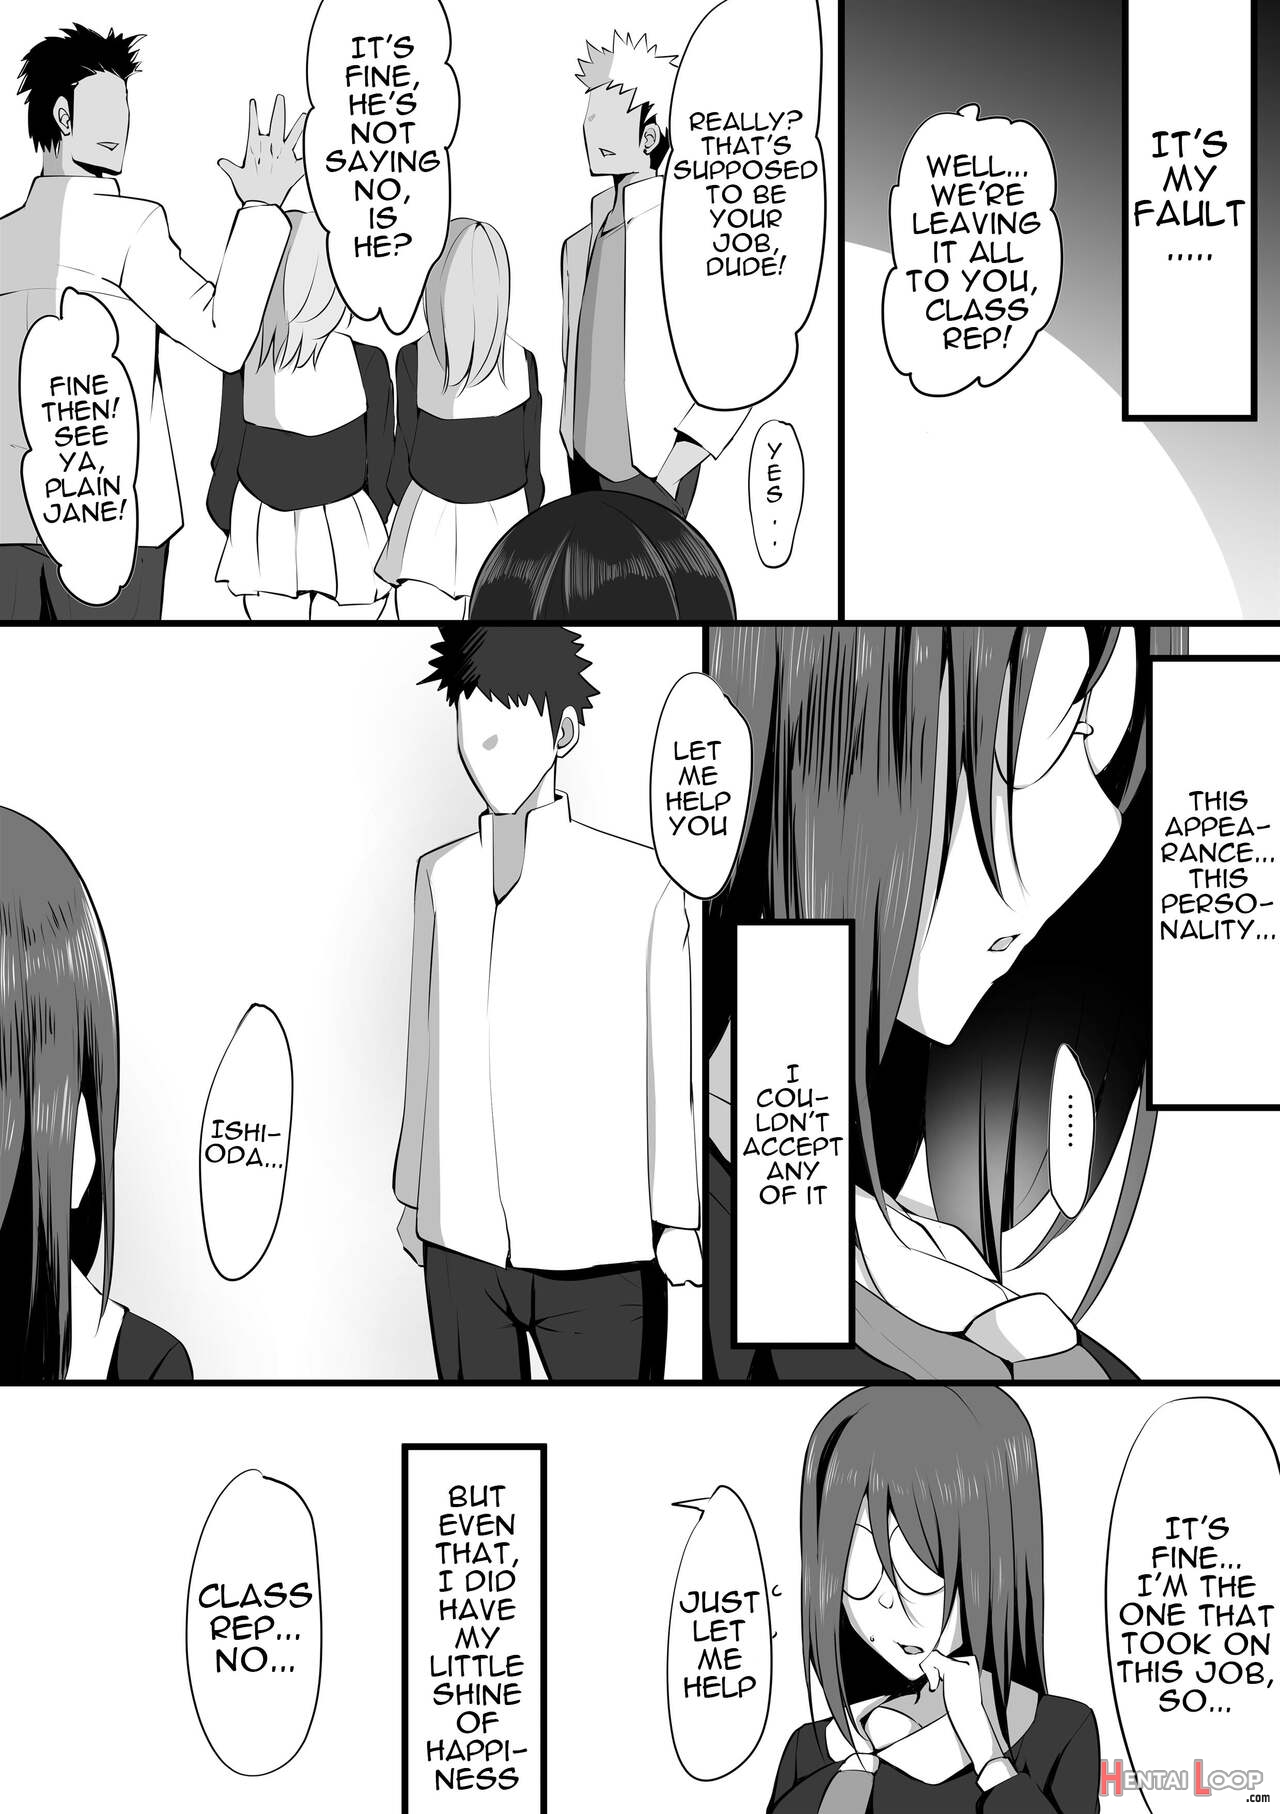 The Girl Behind The Glasses ~girlfriend Ntr~ page 2